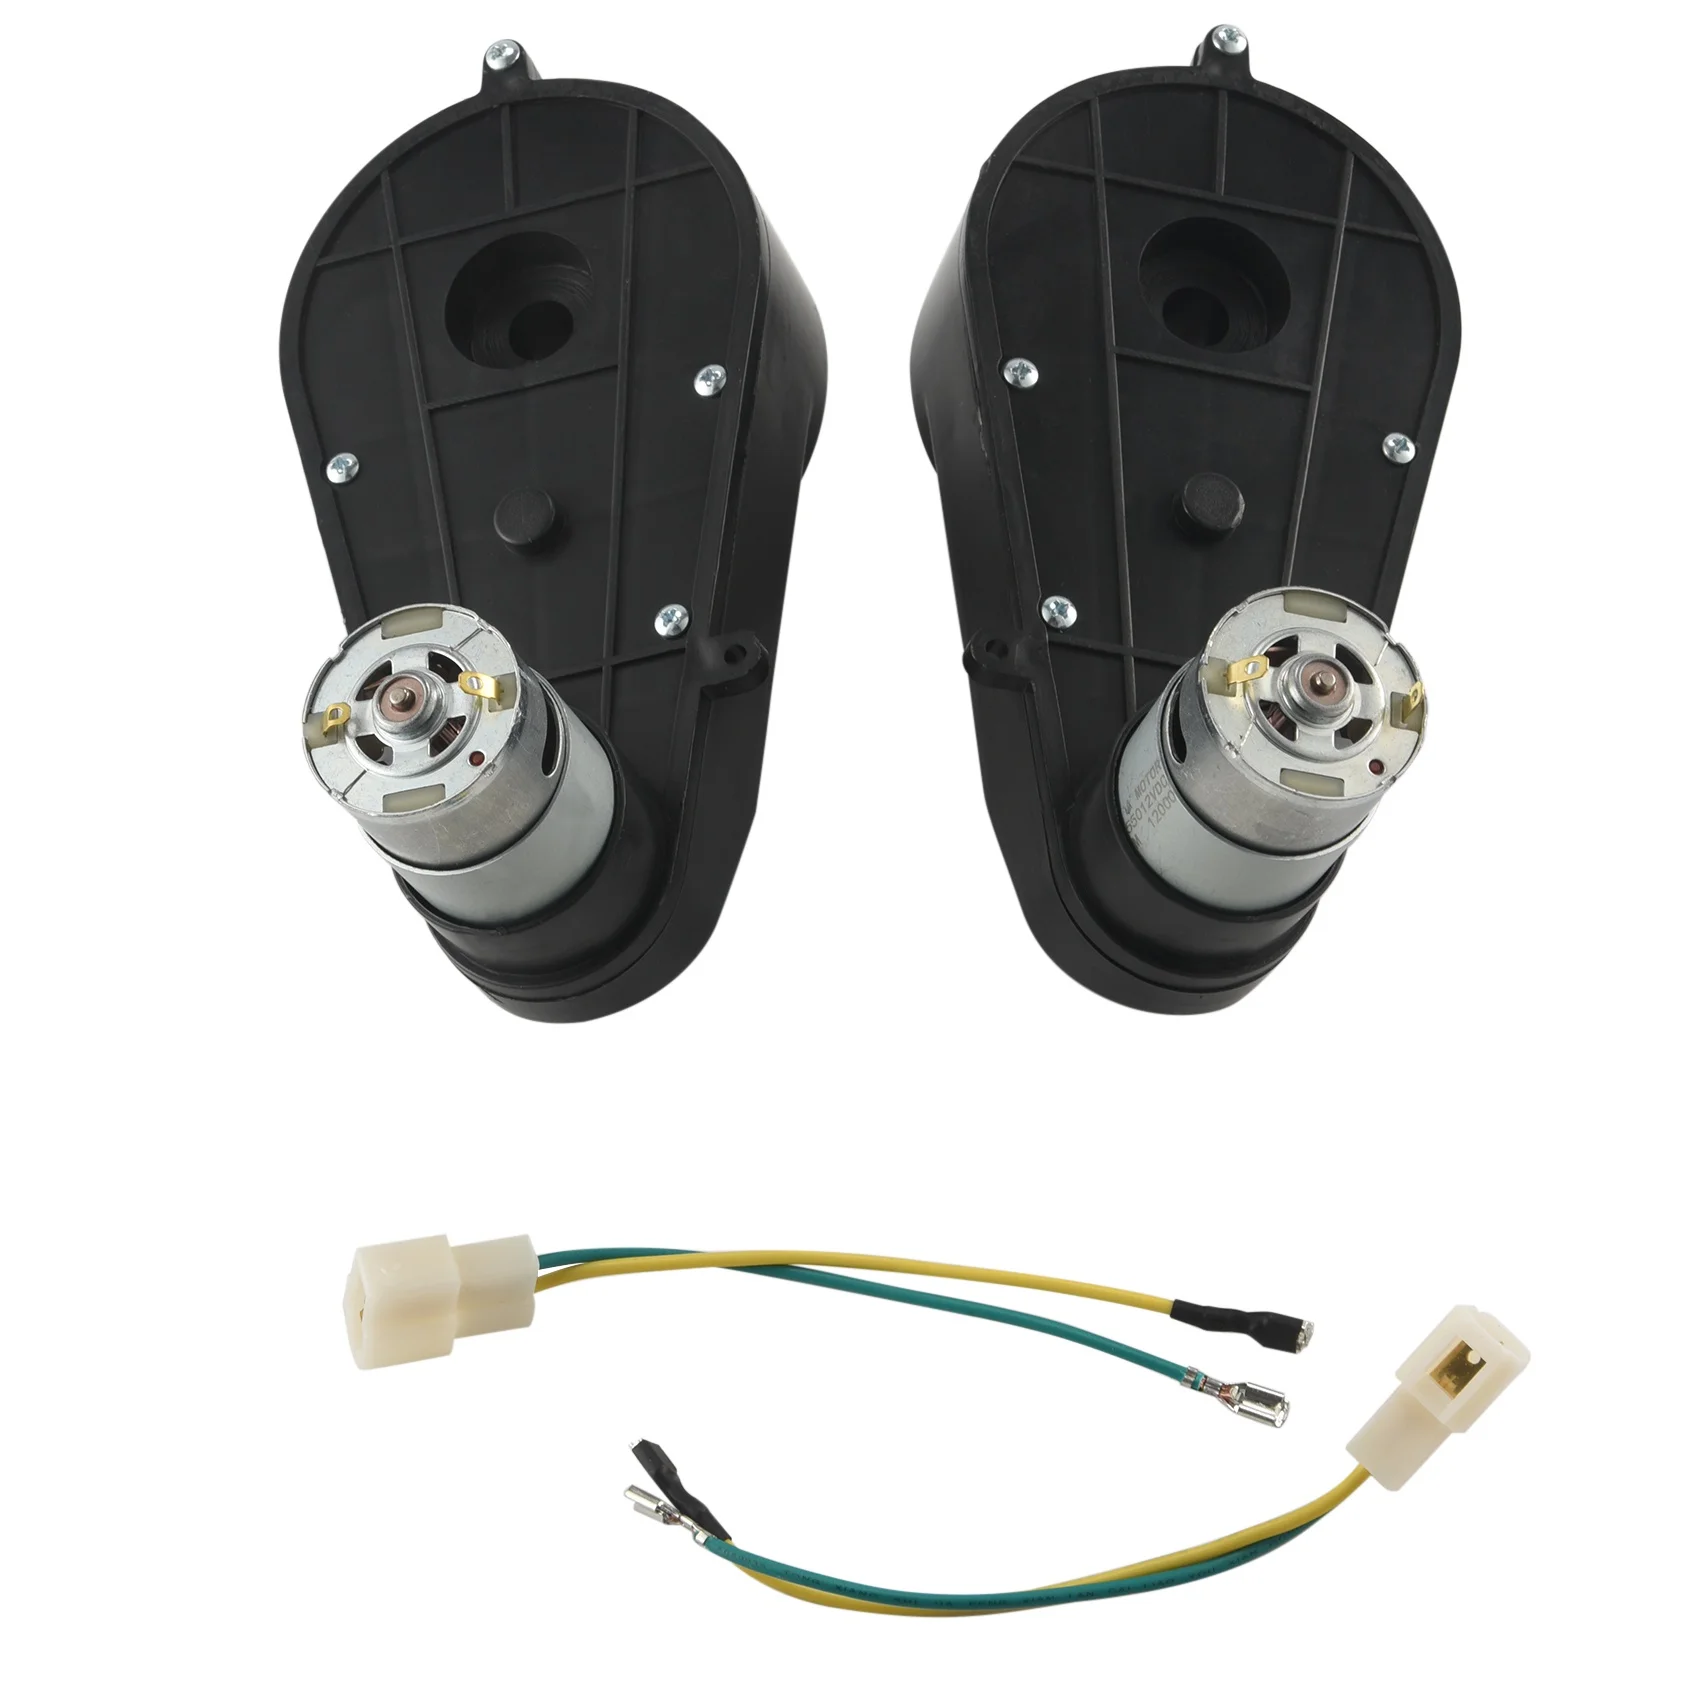 

2 Pcs 550 Universal Children Electric Car Gearbox With Motor, 12Vdc Motor With Gear Box, Kids Ride On Car Baby Car Parts